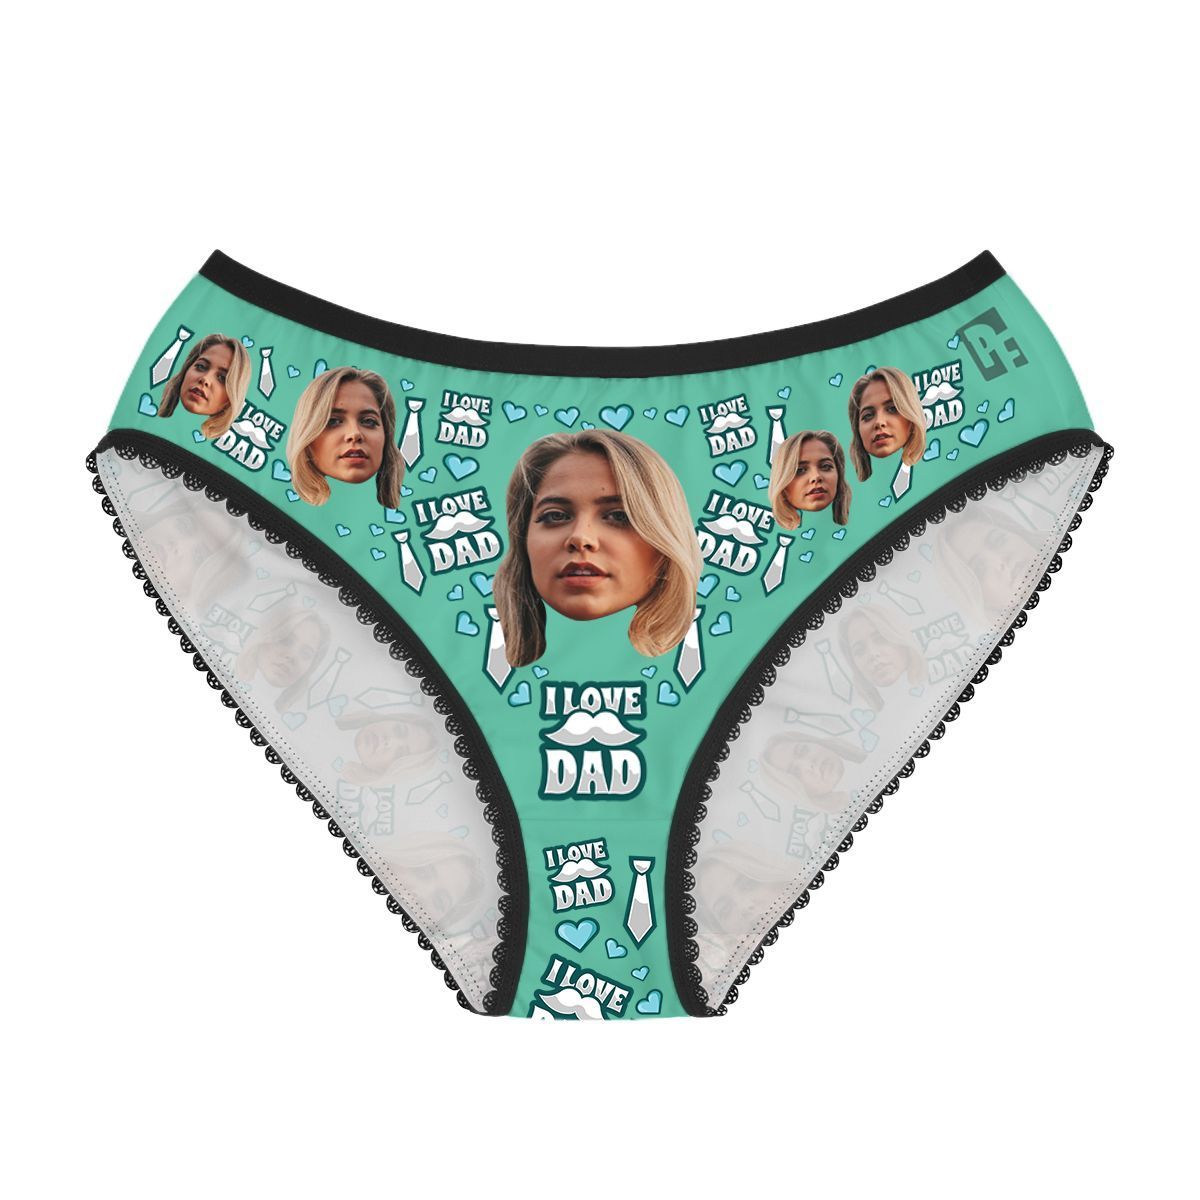 Mint Love dad women's underwear briefs personalized with photo printed on them